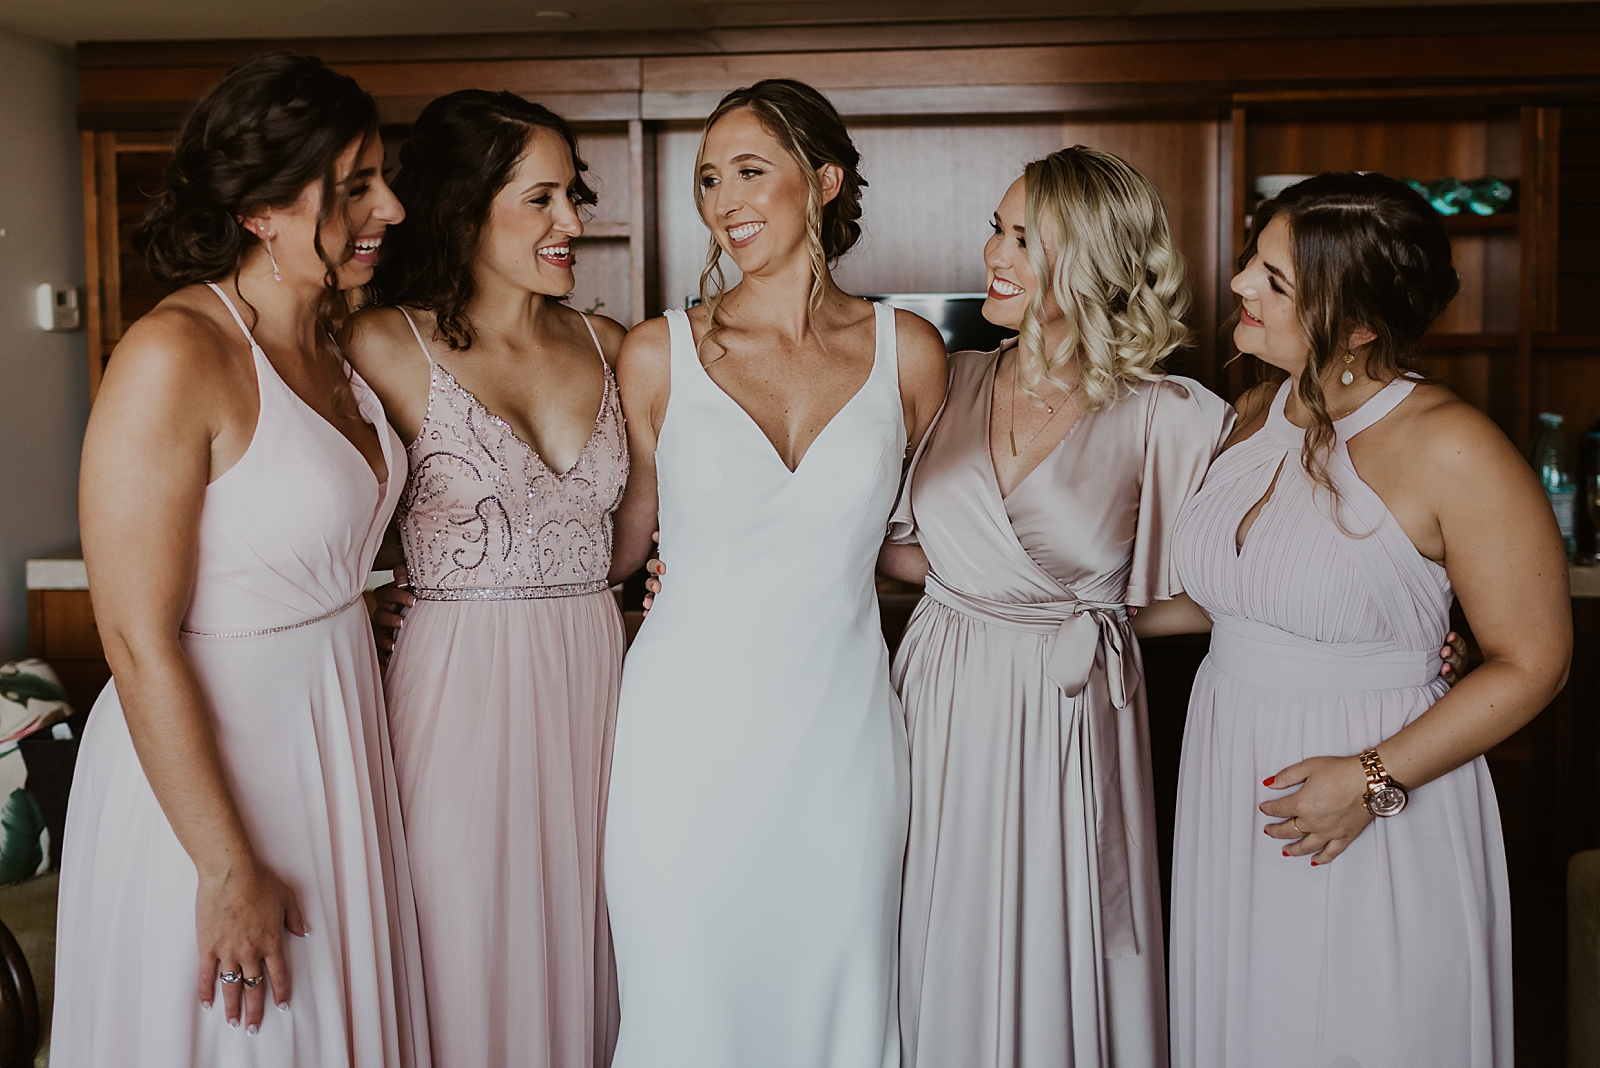 Bride with Bridesmaids after getting ready inside